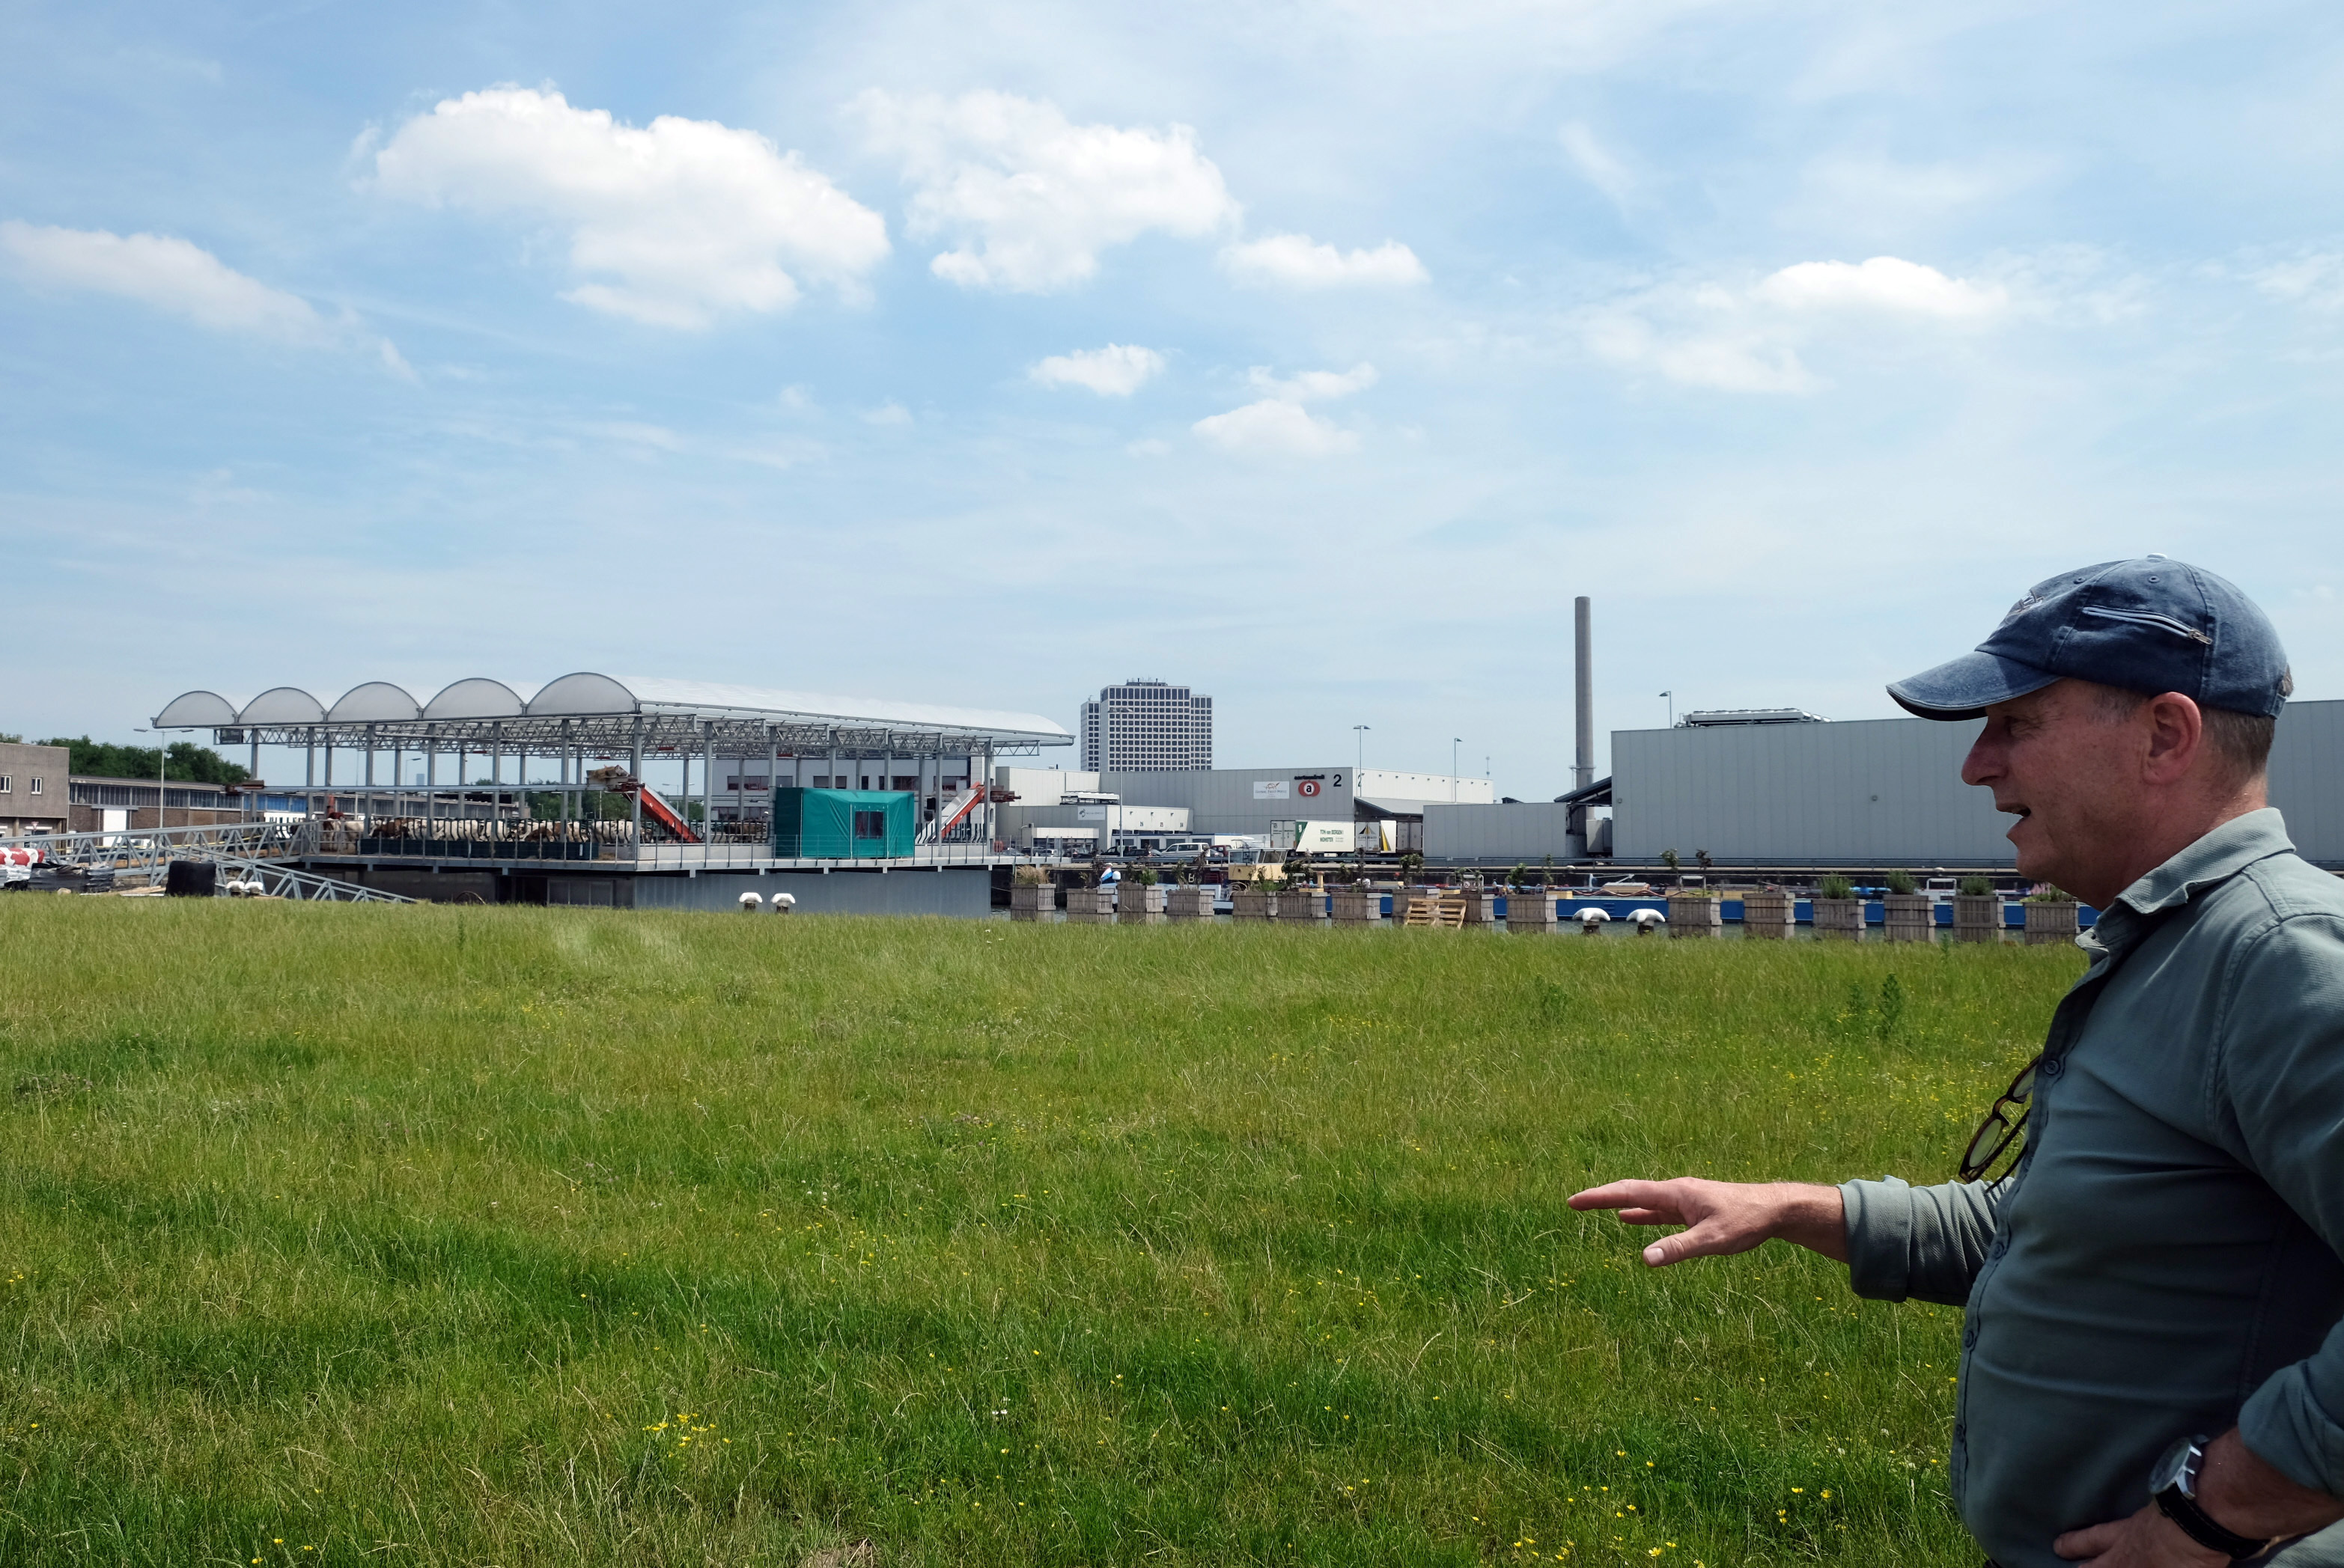 In this photo taken Monday, June 24, 2019, Peter van Wingerden talks about his farming project, seen back left, a futuristic three-storey floating farm moored in Rotterdam harbour, Netherlands, which uses waste products from local industries to sustain its green credentials. The floating dairy farm has one robot that milks the cows, another that automatically scoops up the manure, and a roof designed to collect rain water, making it a sustainable inner-city producer of dairy foods aimed at feeding future generations of city dwellers, according to the small holding farmer Peter van Wingerden. (AP Photo/Mike Corder)